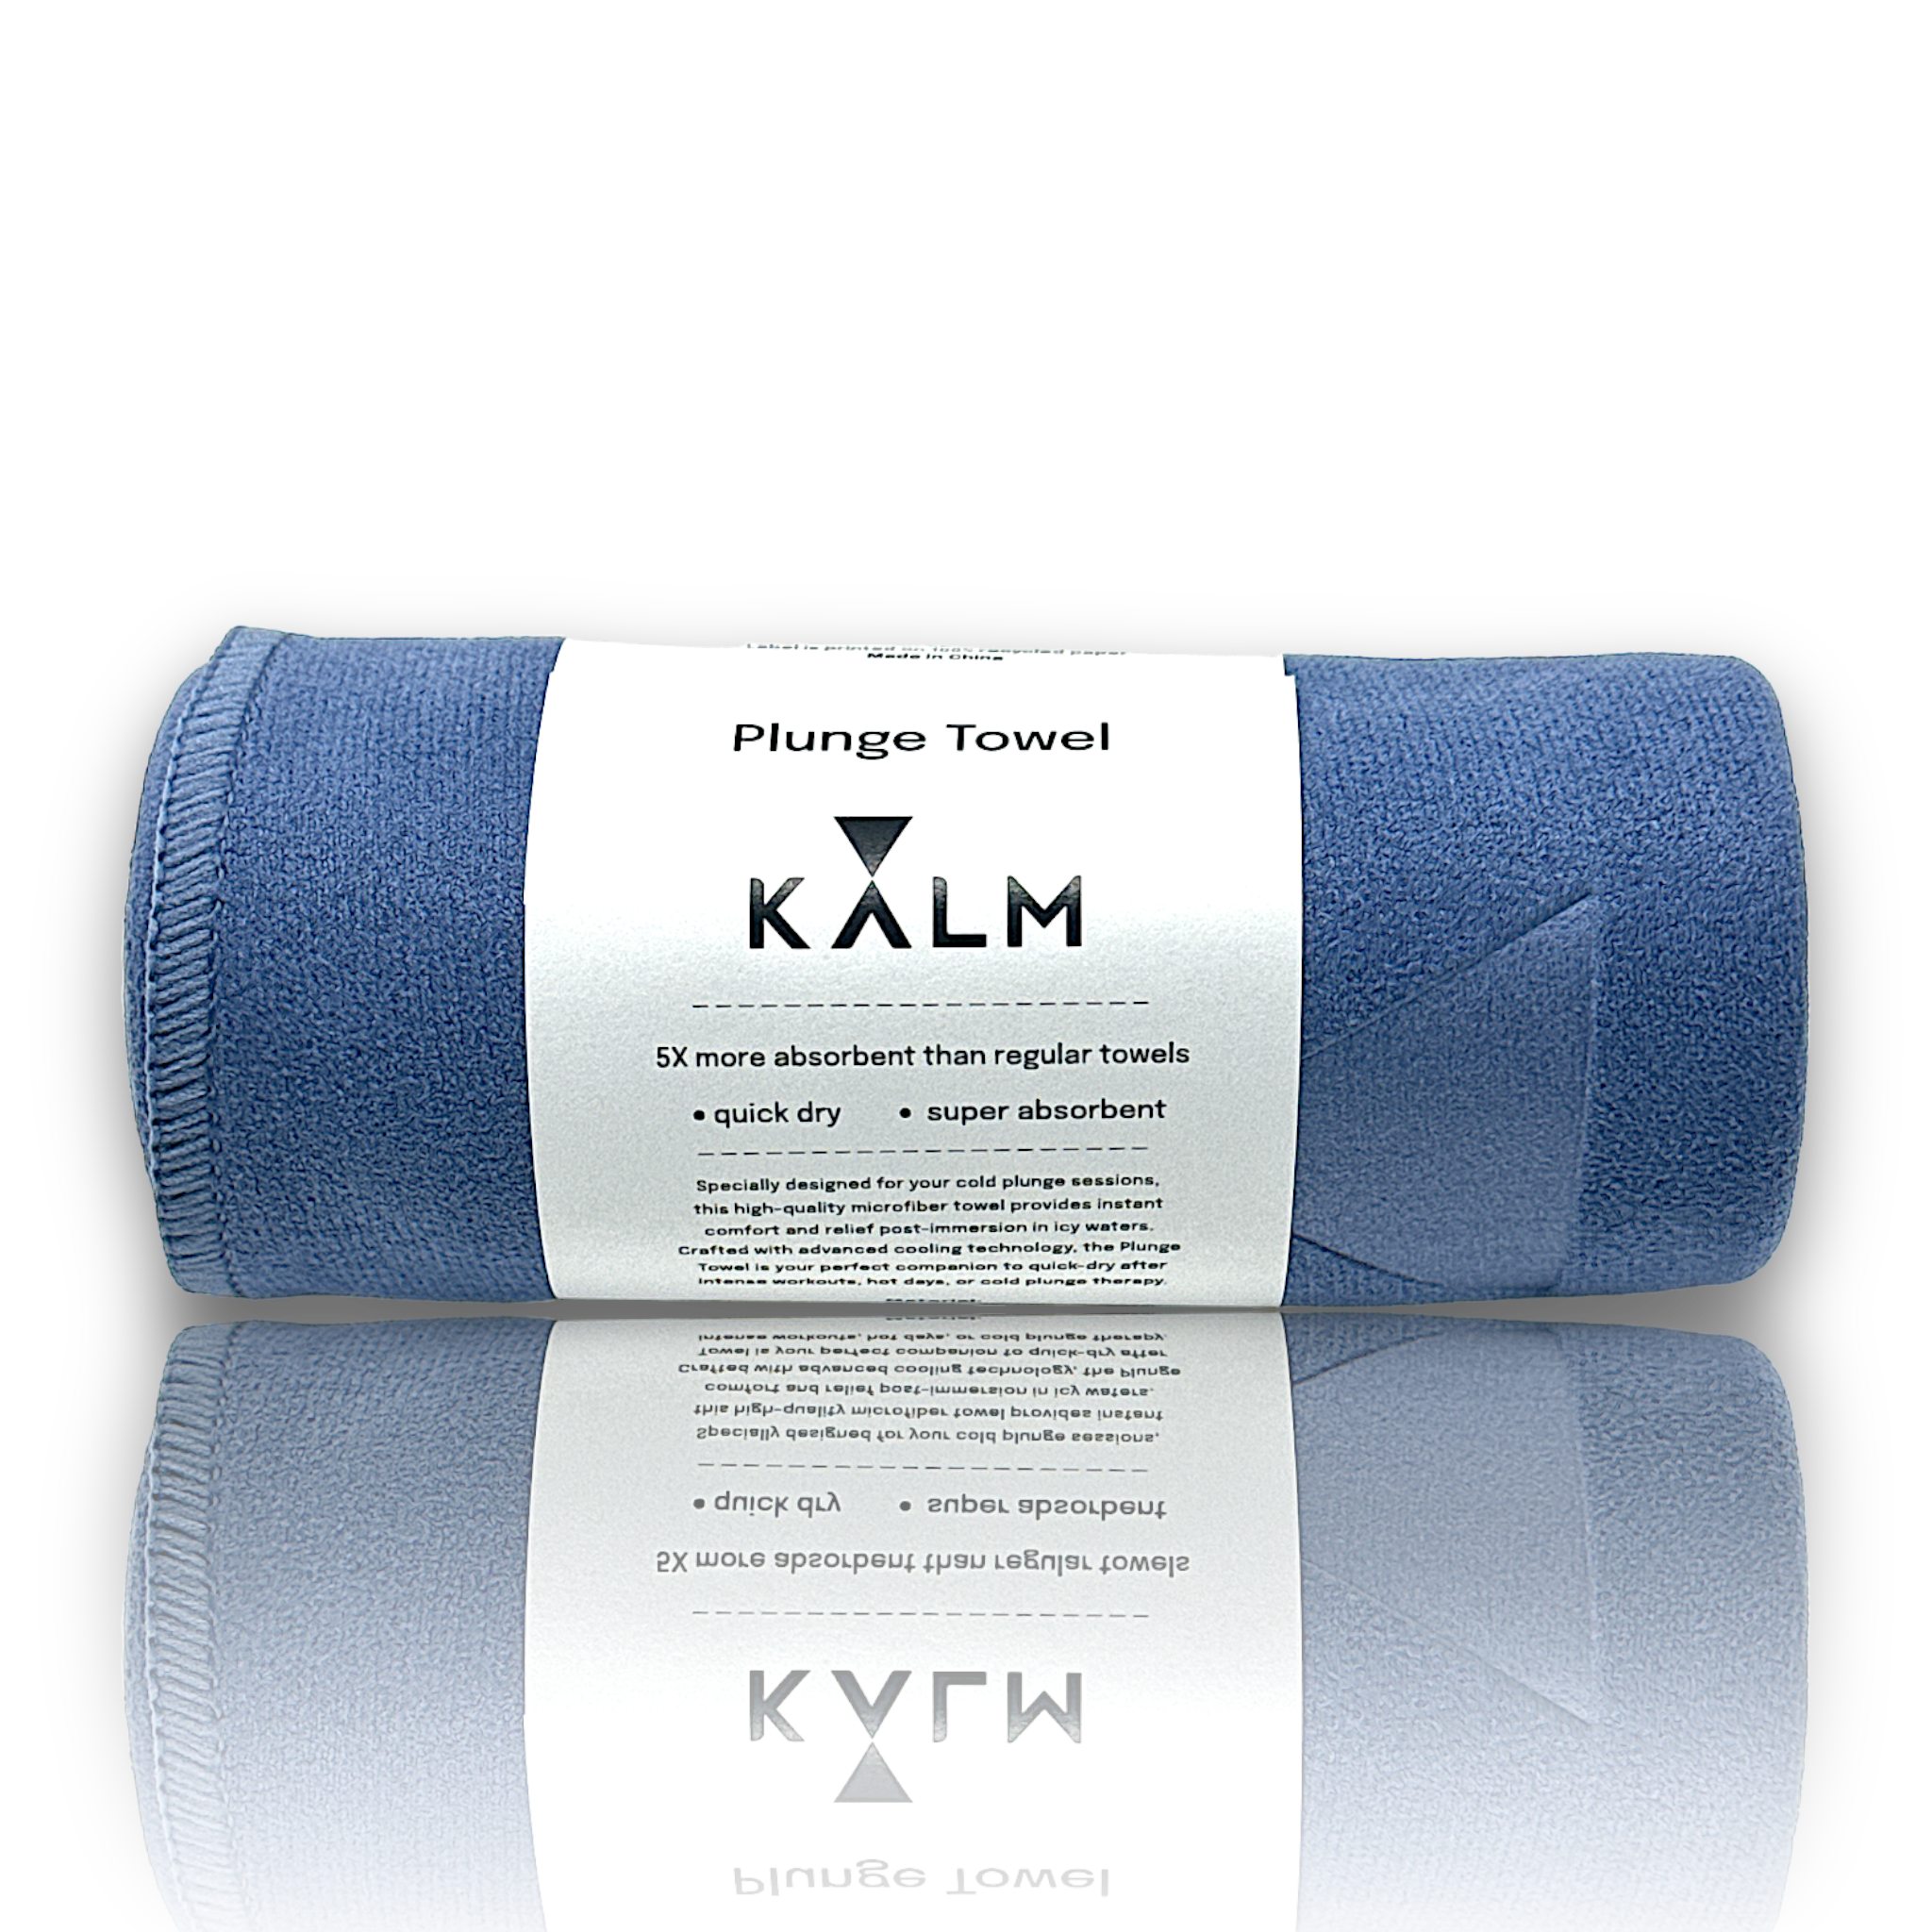 The Plunge Towel